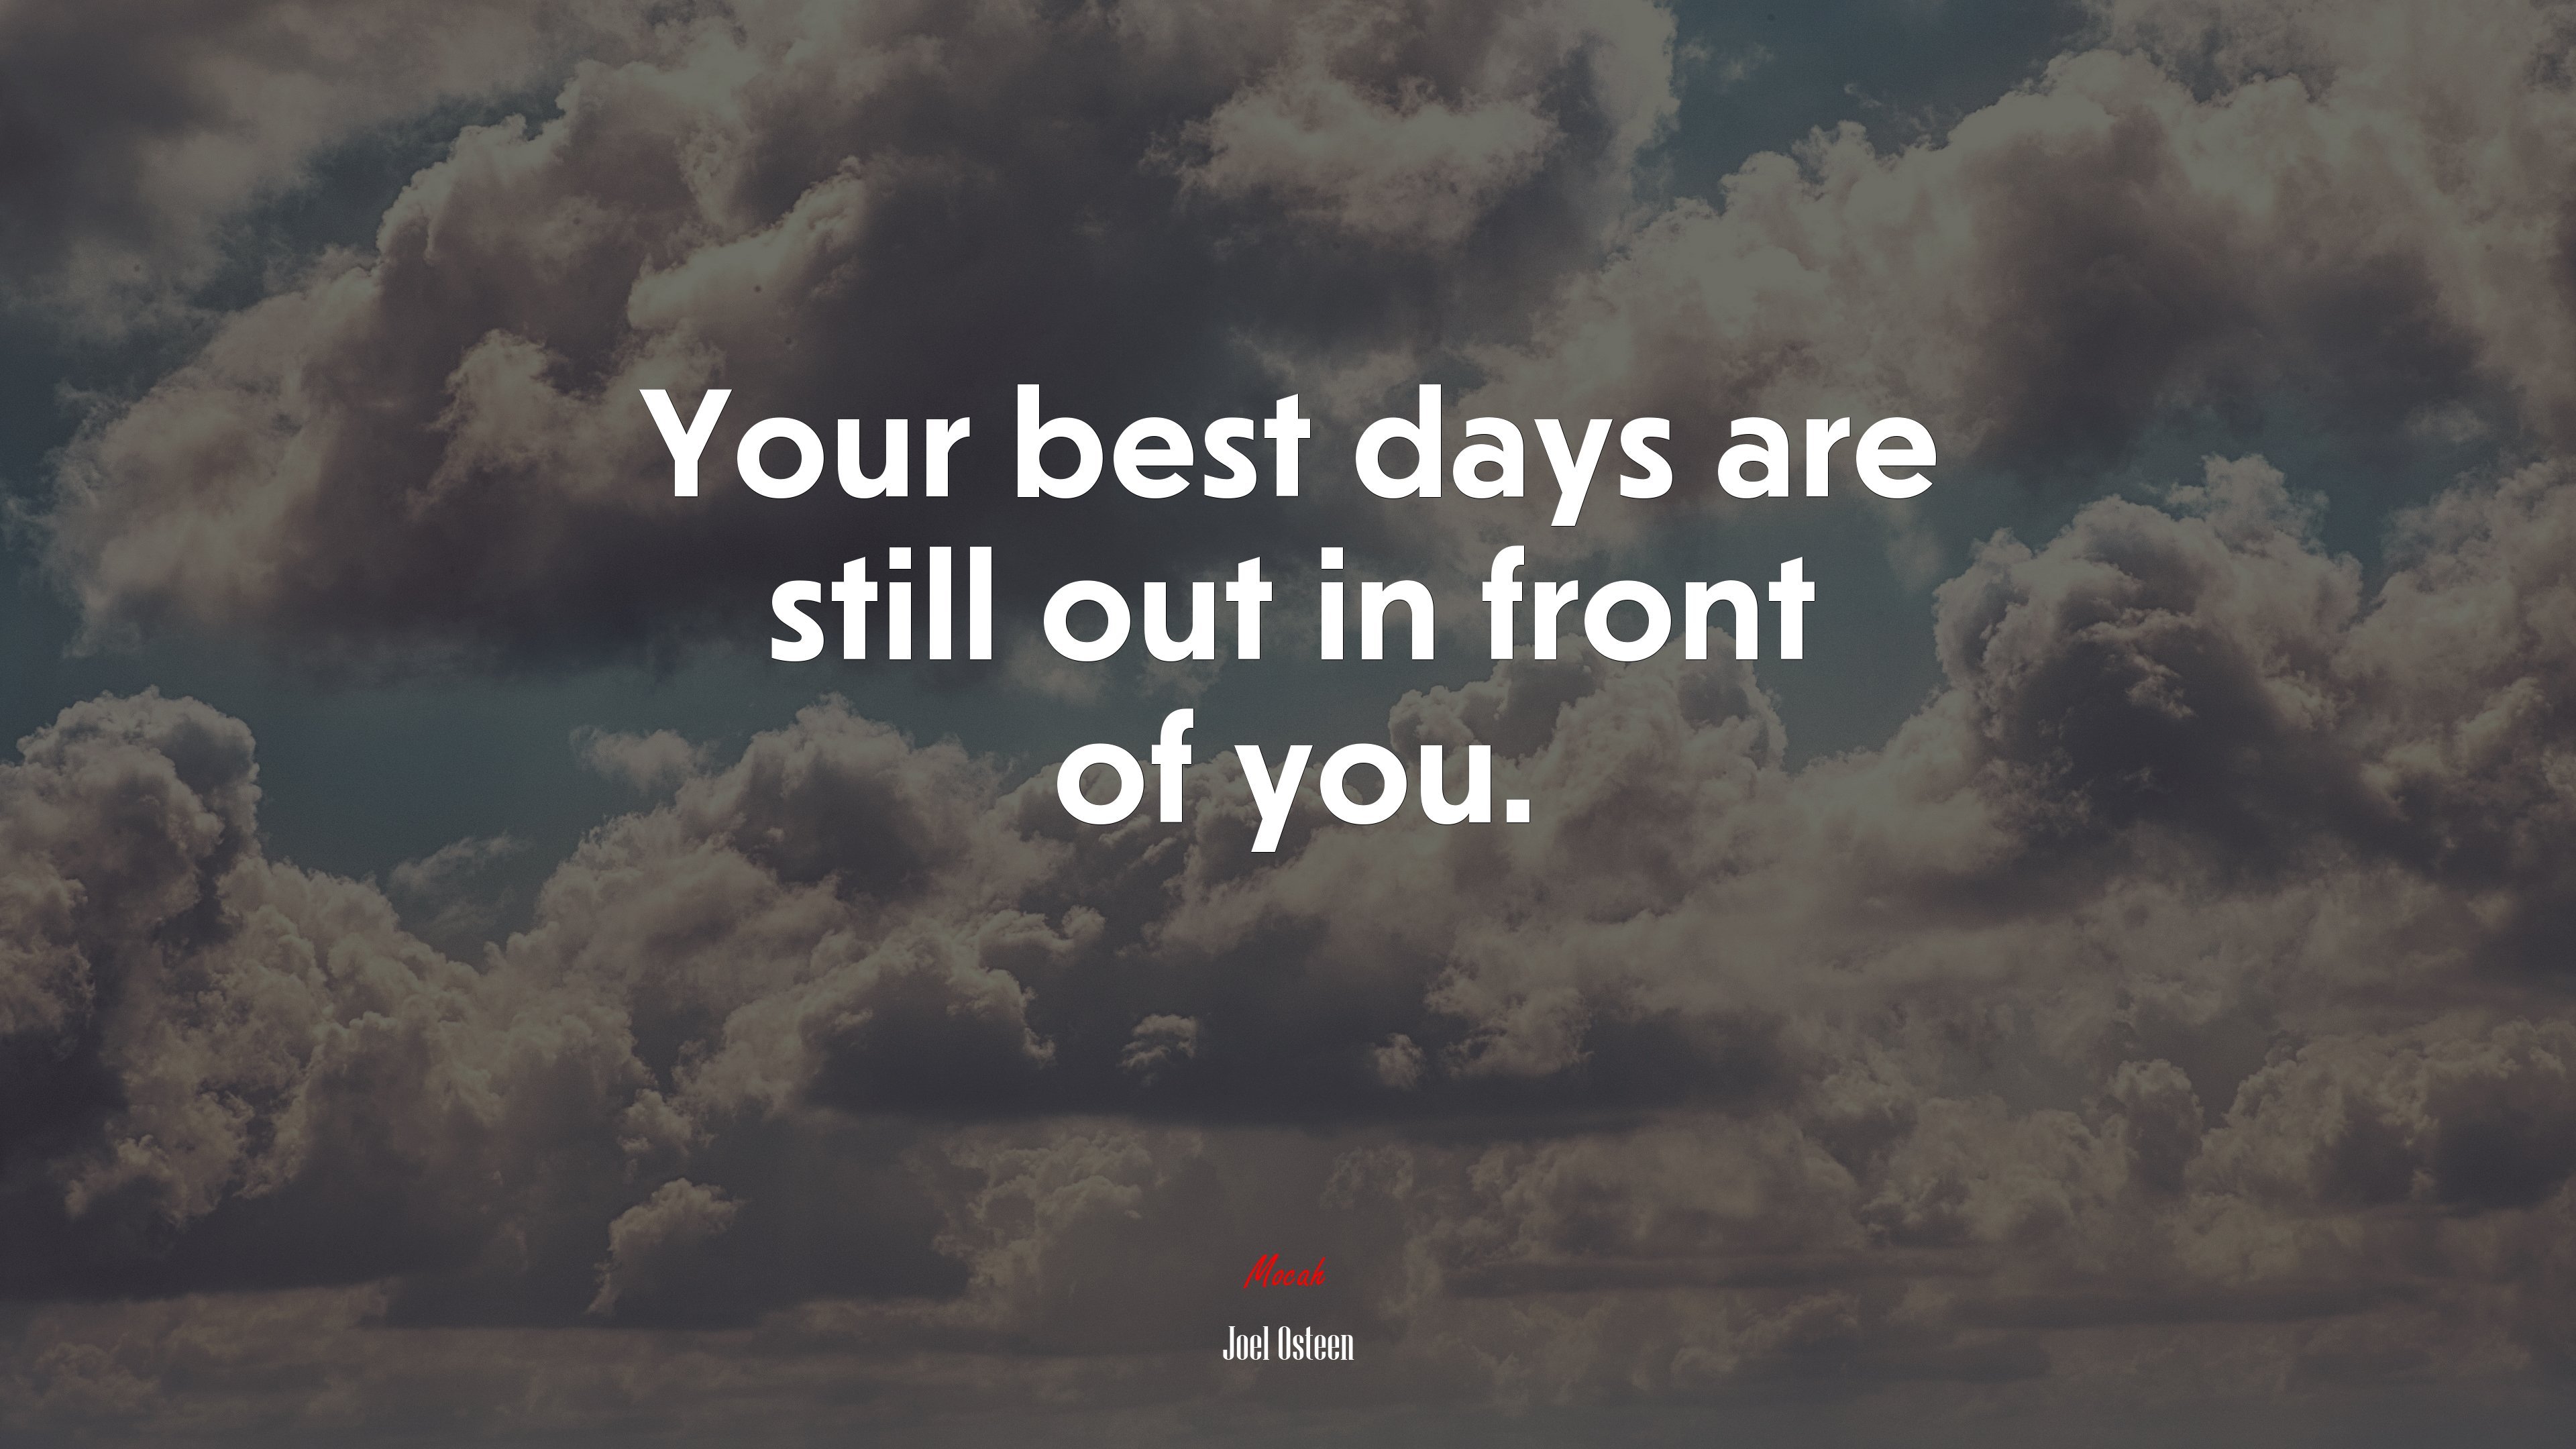 Your best days are still out in front of you. Joel Osteen quote, 4k wallpaper HD Wallpaper